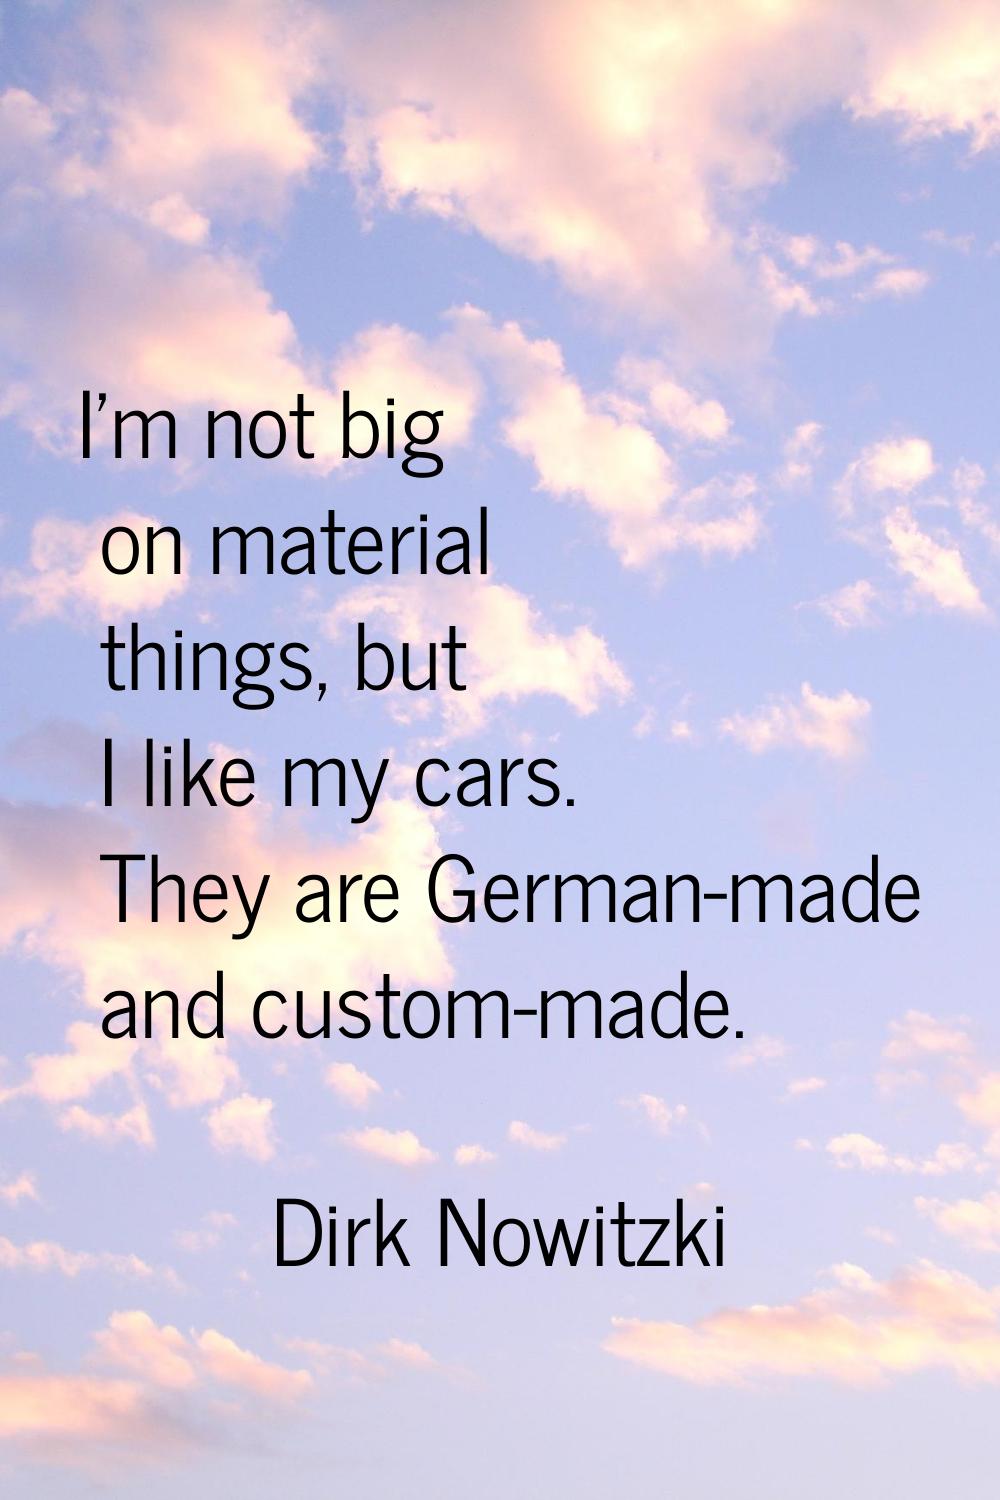 I'm not big on material things, but I like my cars. They are German-made and custom-made.